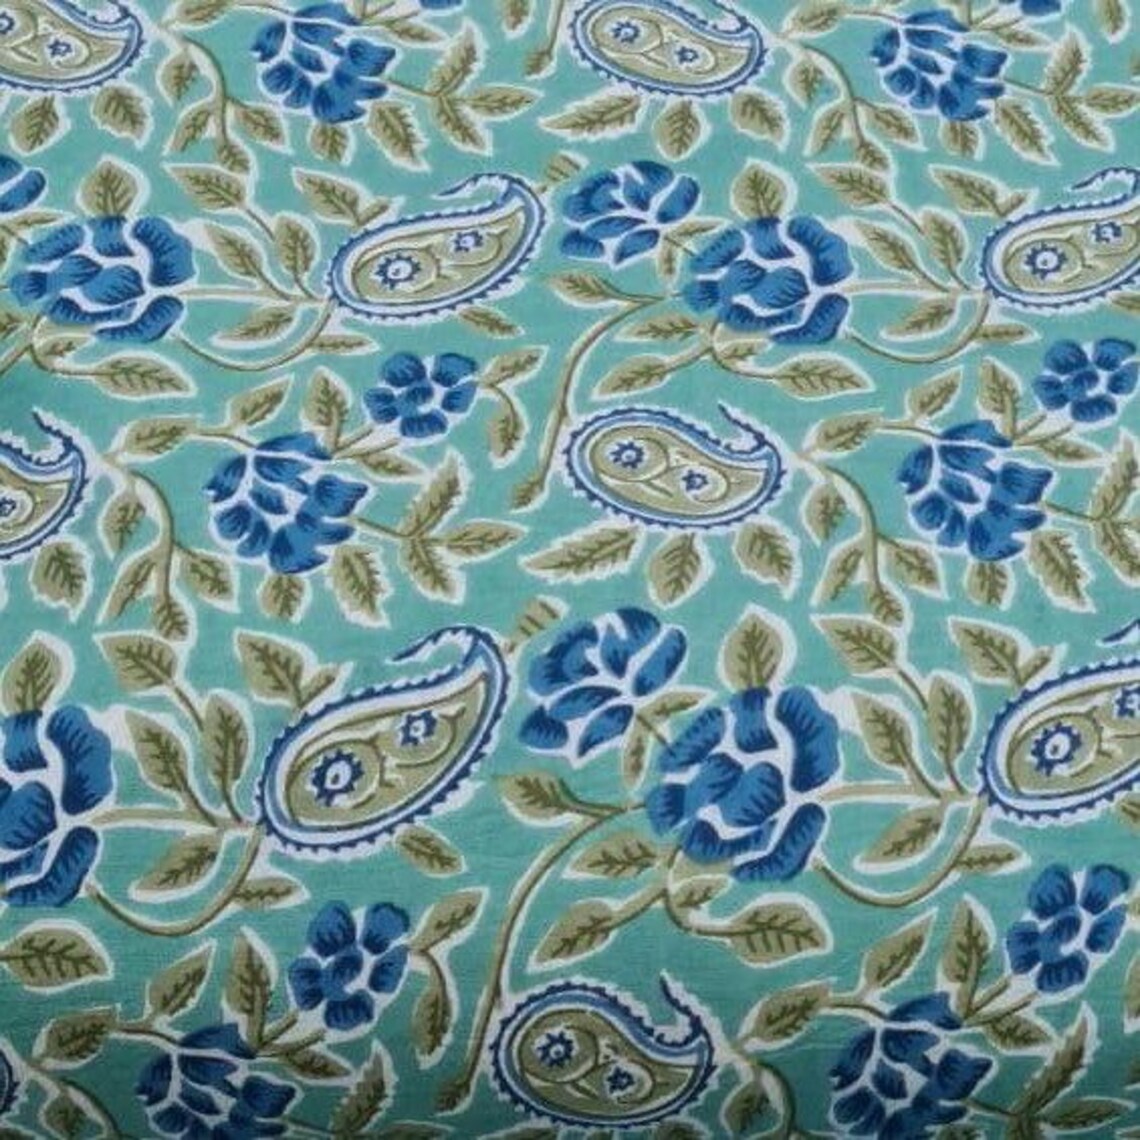 Green Blue Block Print Fabric Cotton Fabric Fabric By the | Etsy